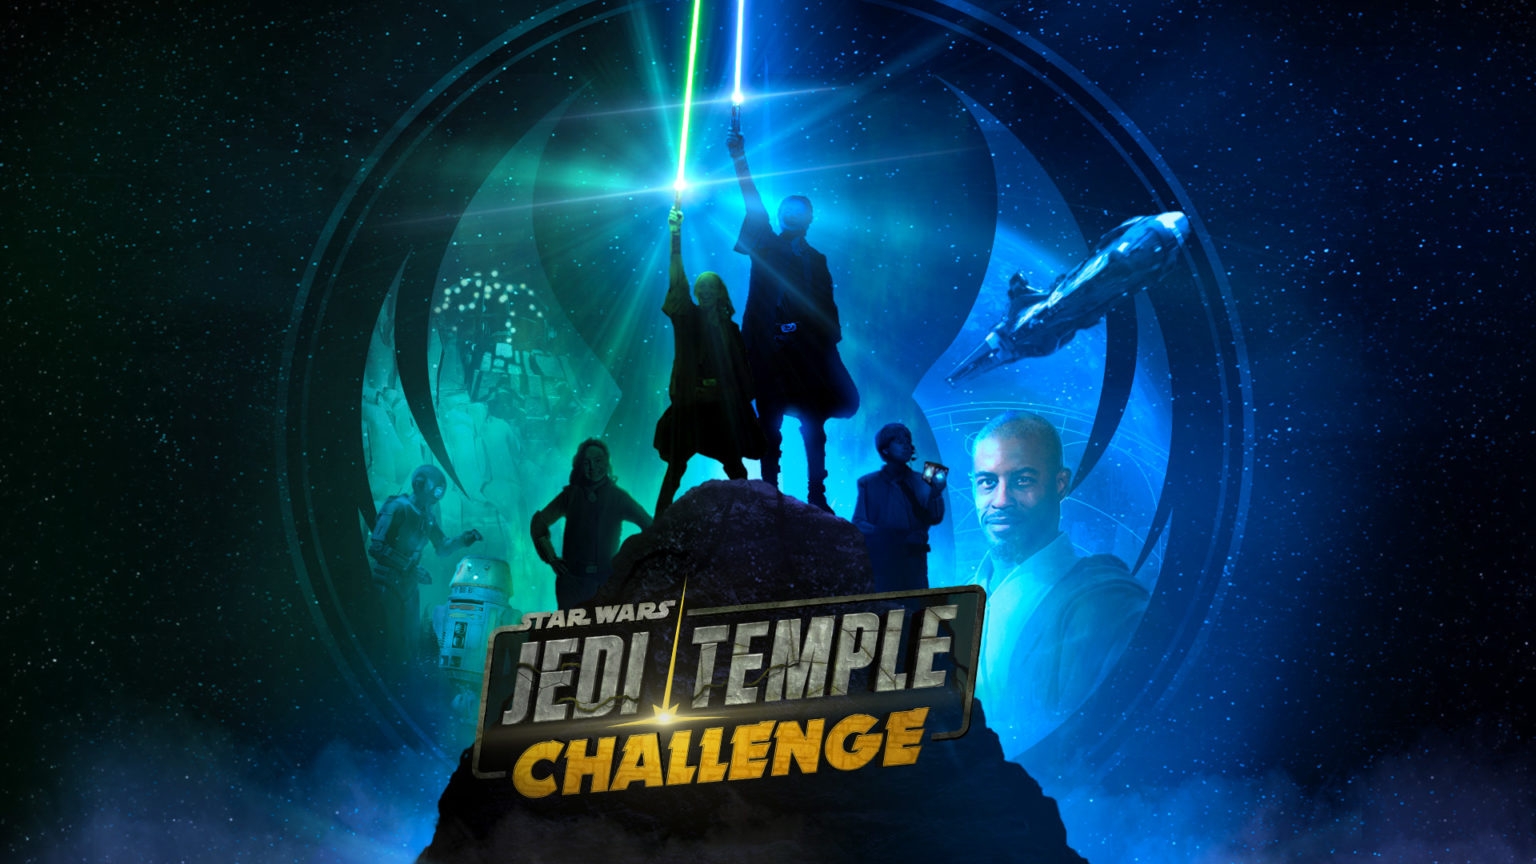 Jedi Temple Challenge Releases First Trailer For Show